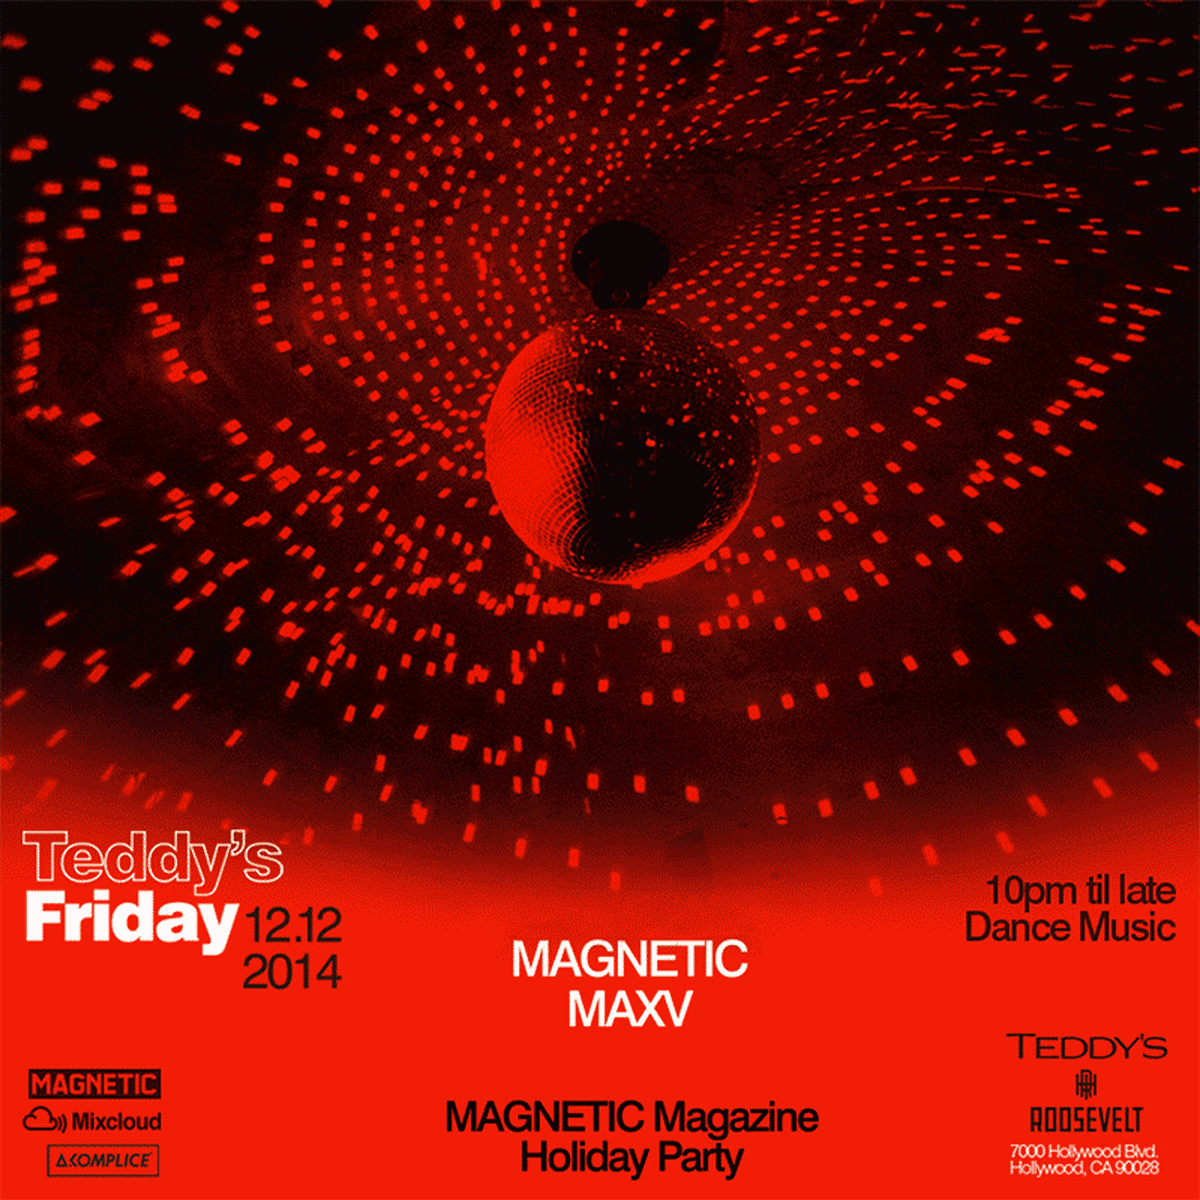 Magnetic's Holiday Party This Friday At Teddy's